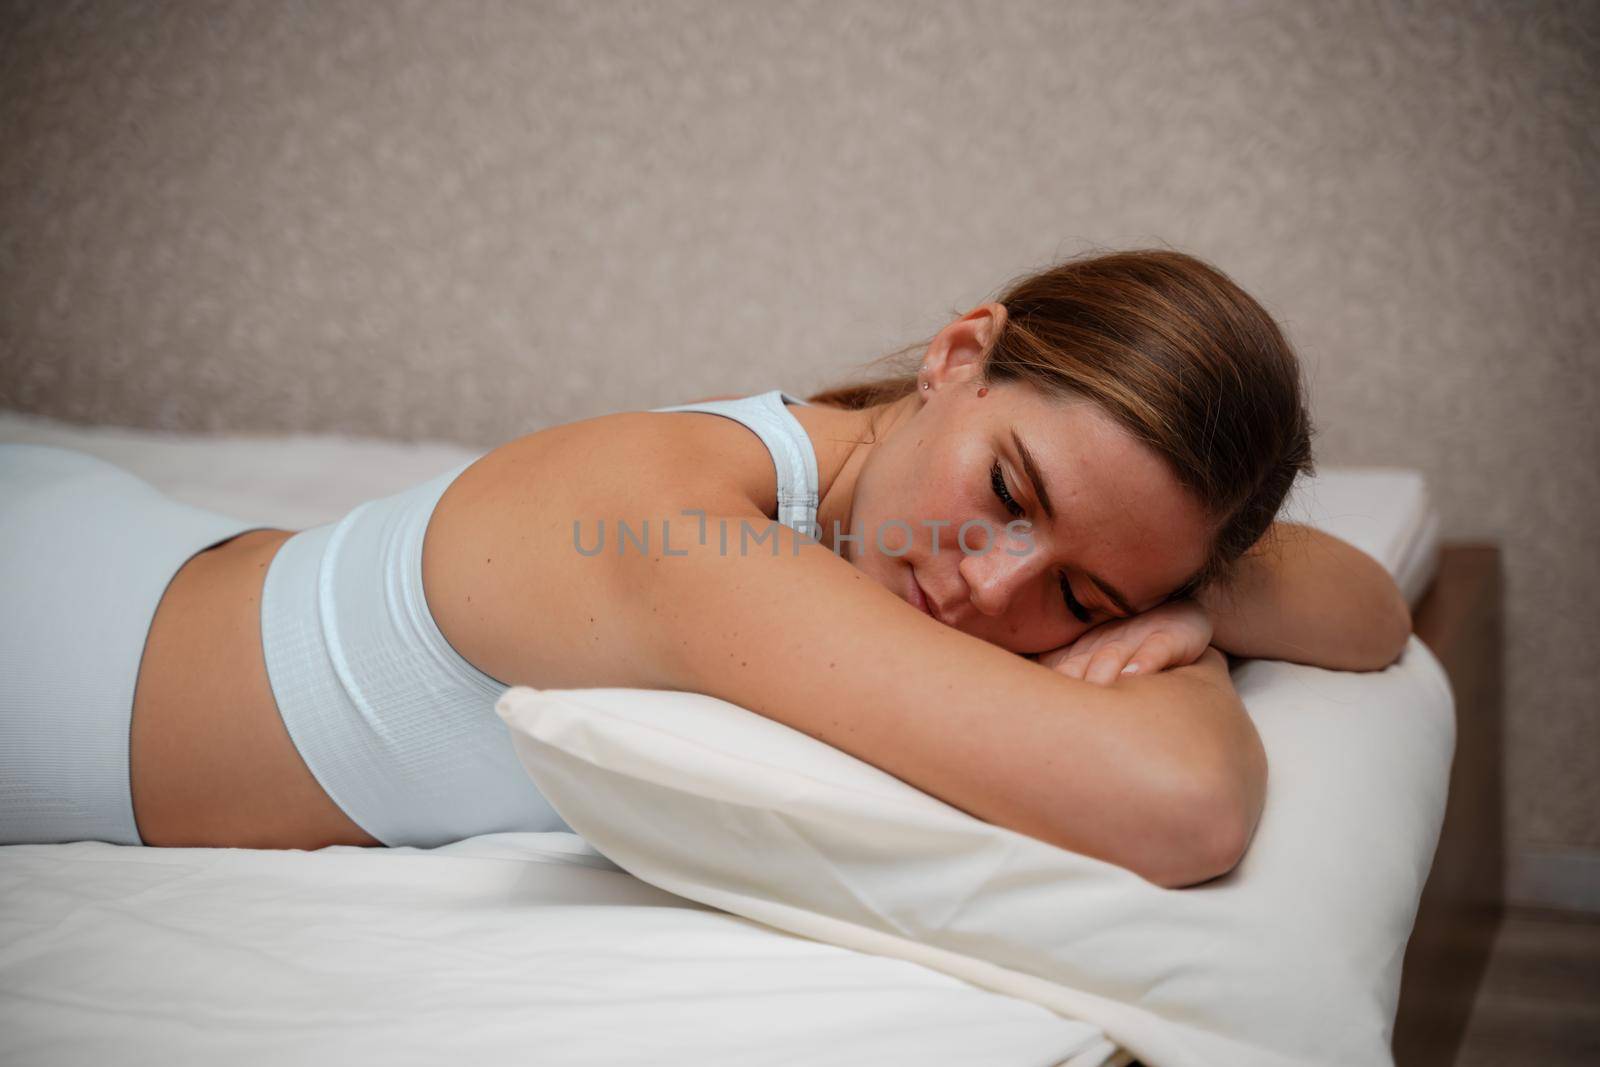 A young woman lies on a bed without a blanket. Bed linen is white